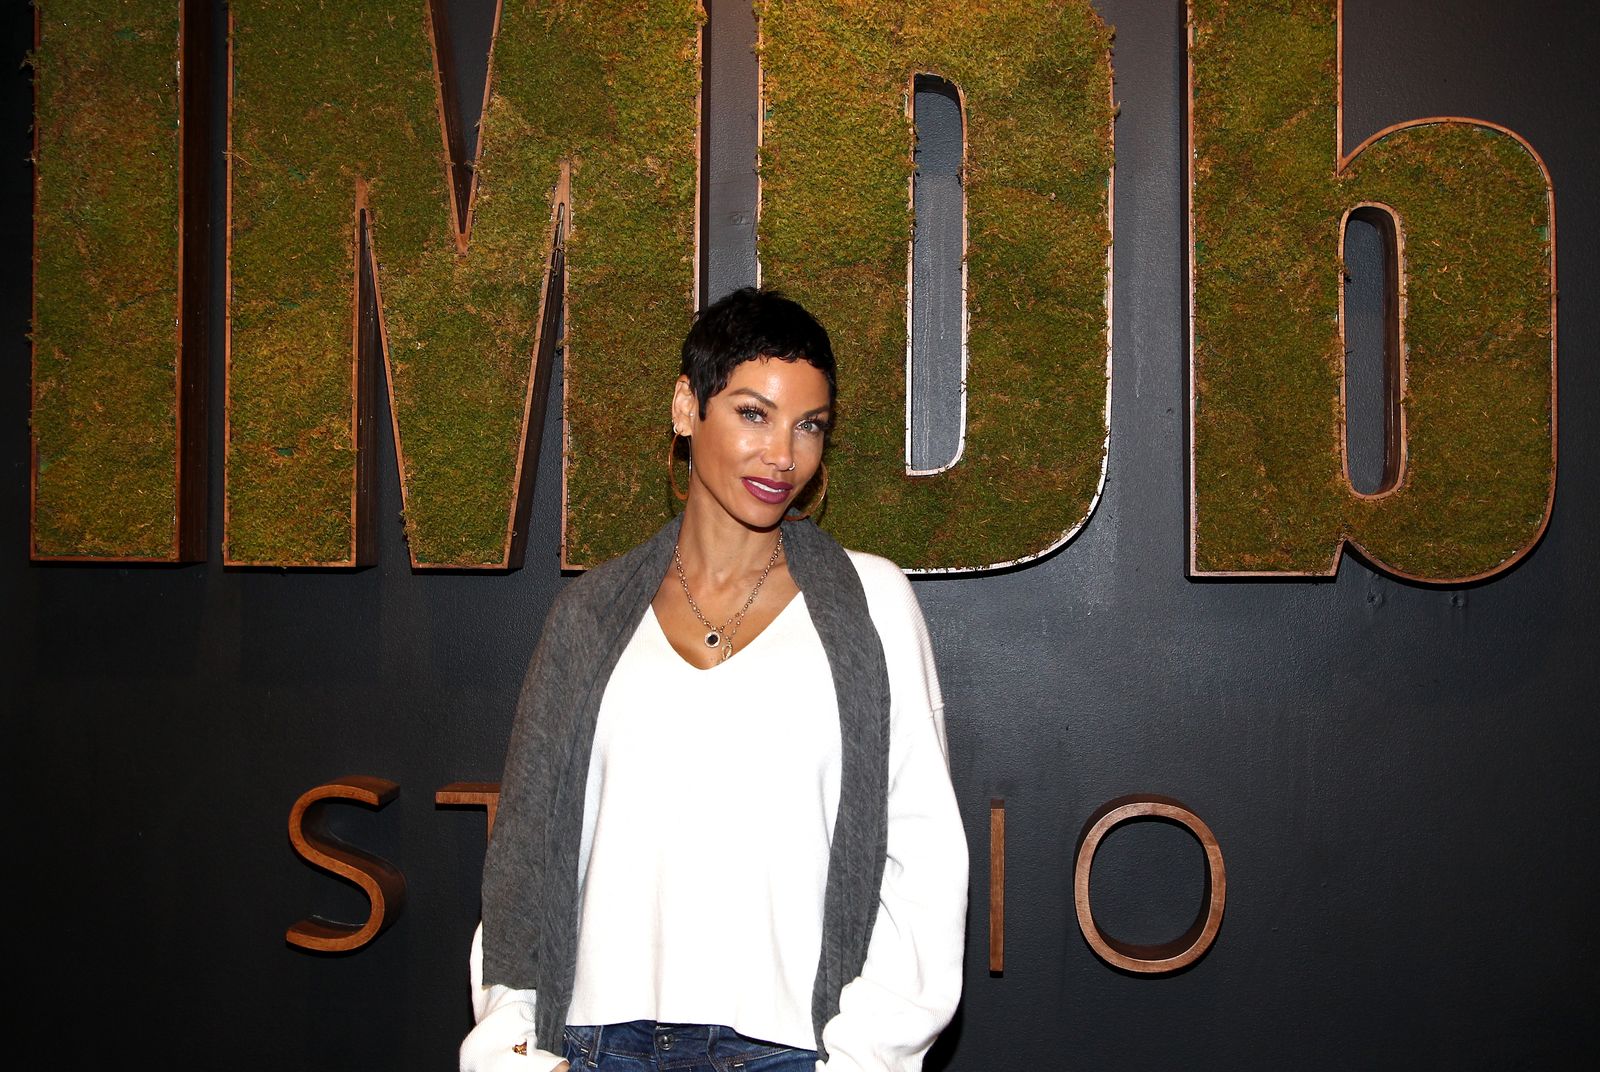 Nicole Mitchell Murphy during the private 50th birthday party for IMDb's Col Needham on January 23, 2017 in Park City, Utah. | Source: Getty Images